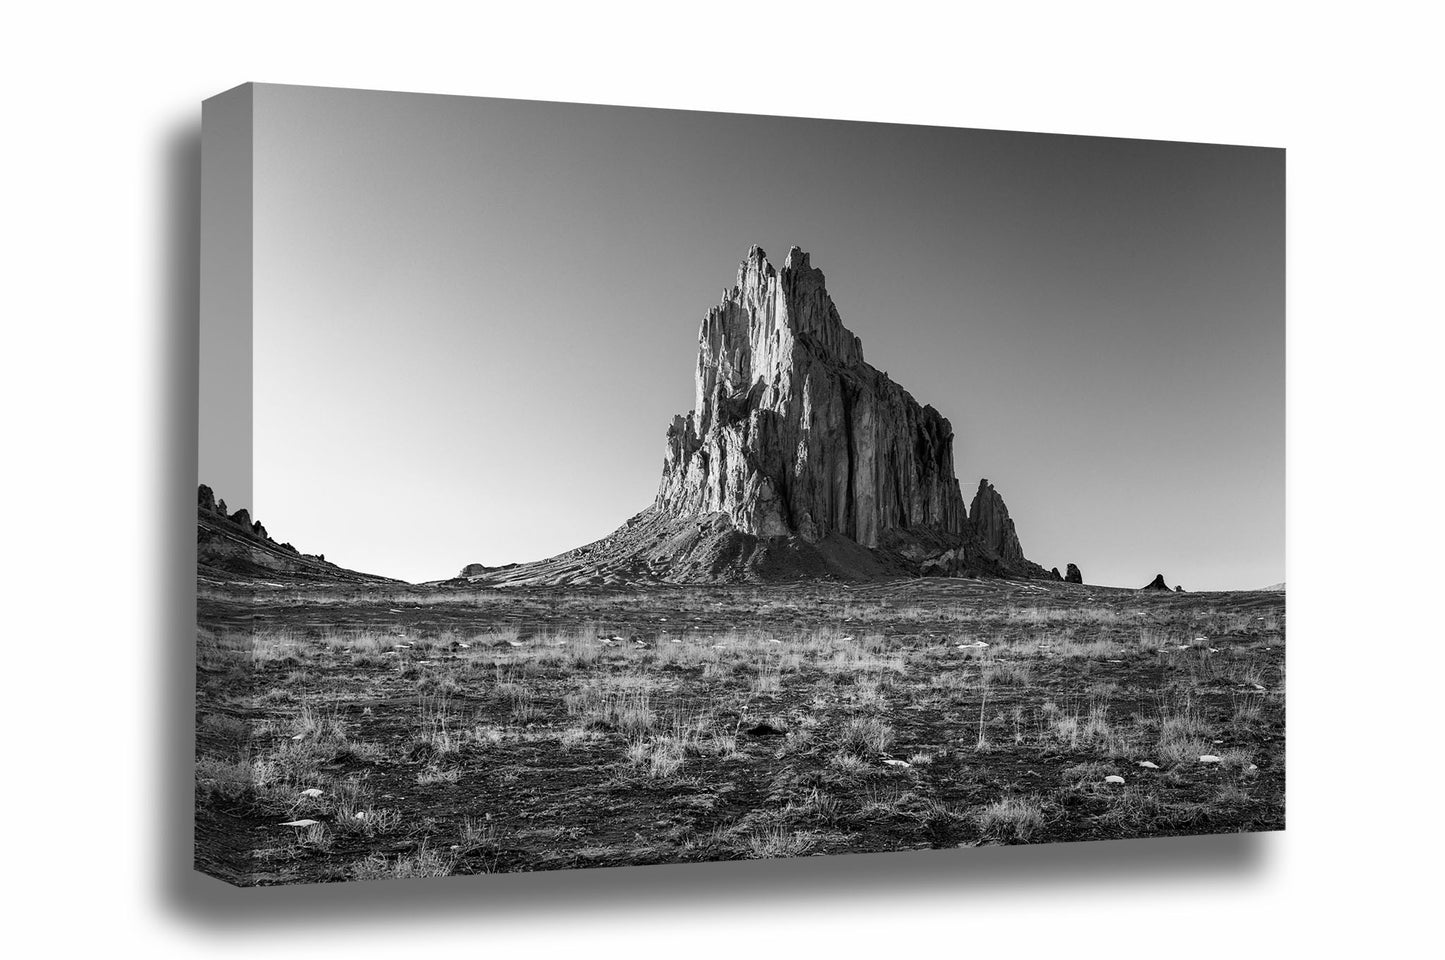 Desert southwest canvas wall art of Shiprock near Farmington, New Mexico in black and white by Sean Ramsey of Southern Plains Photography.